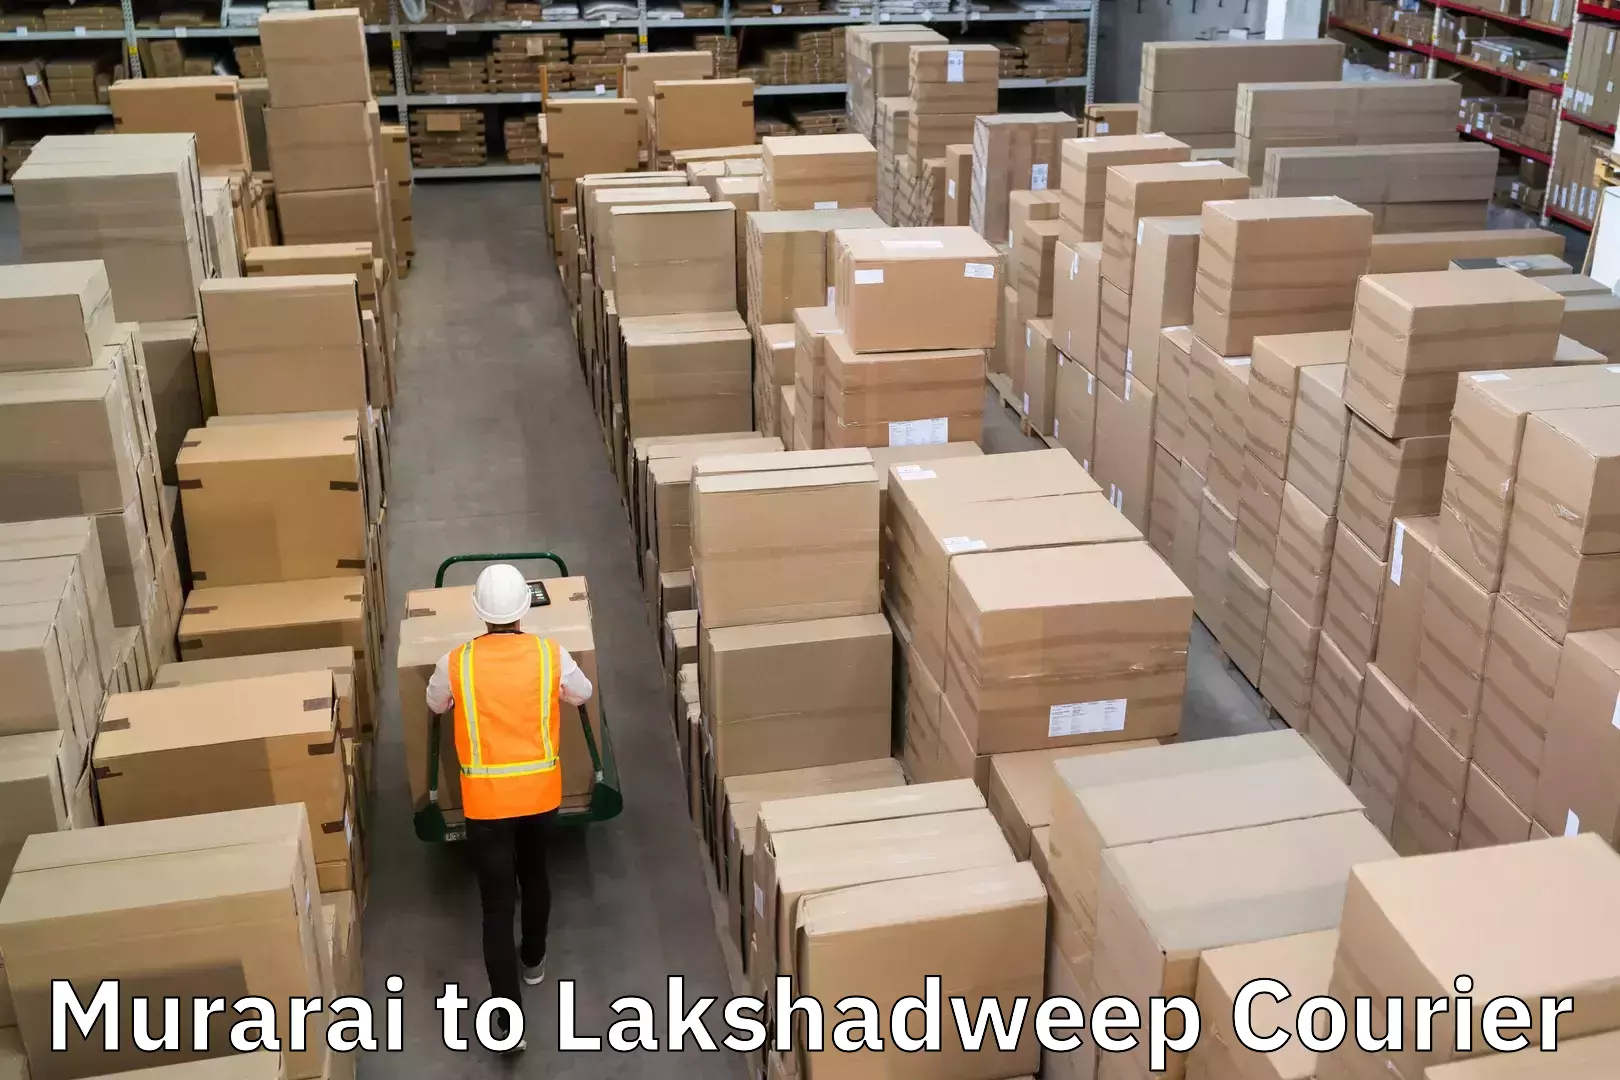 Delivery service partnership in Murarai to Lakshadweep